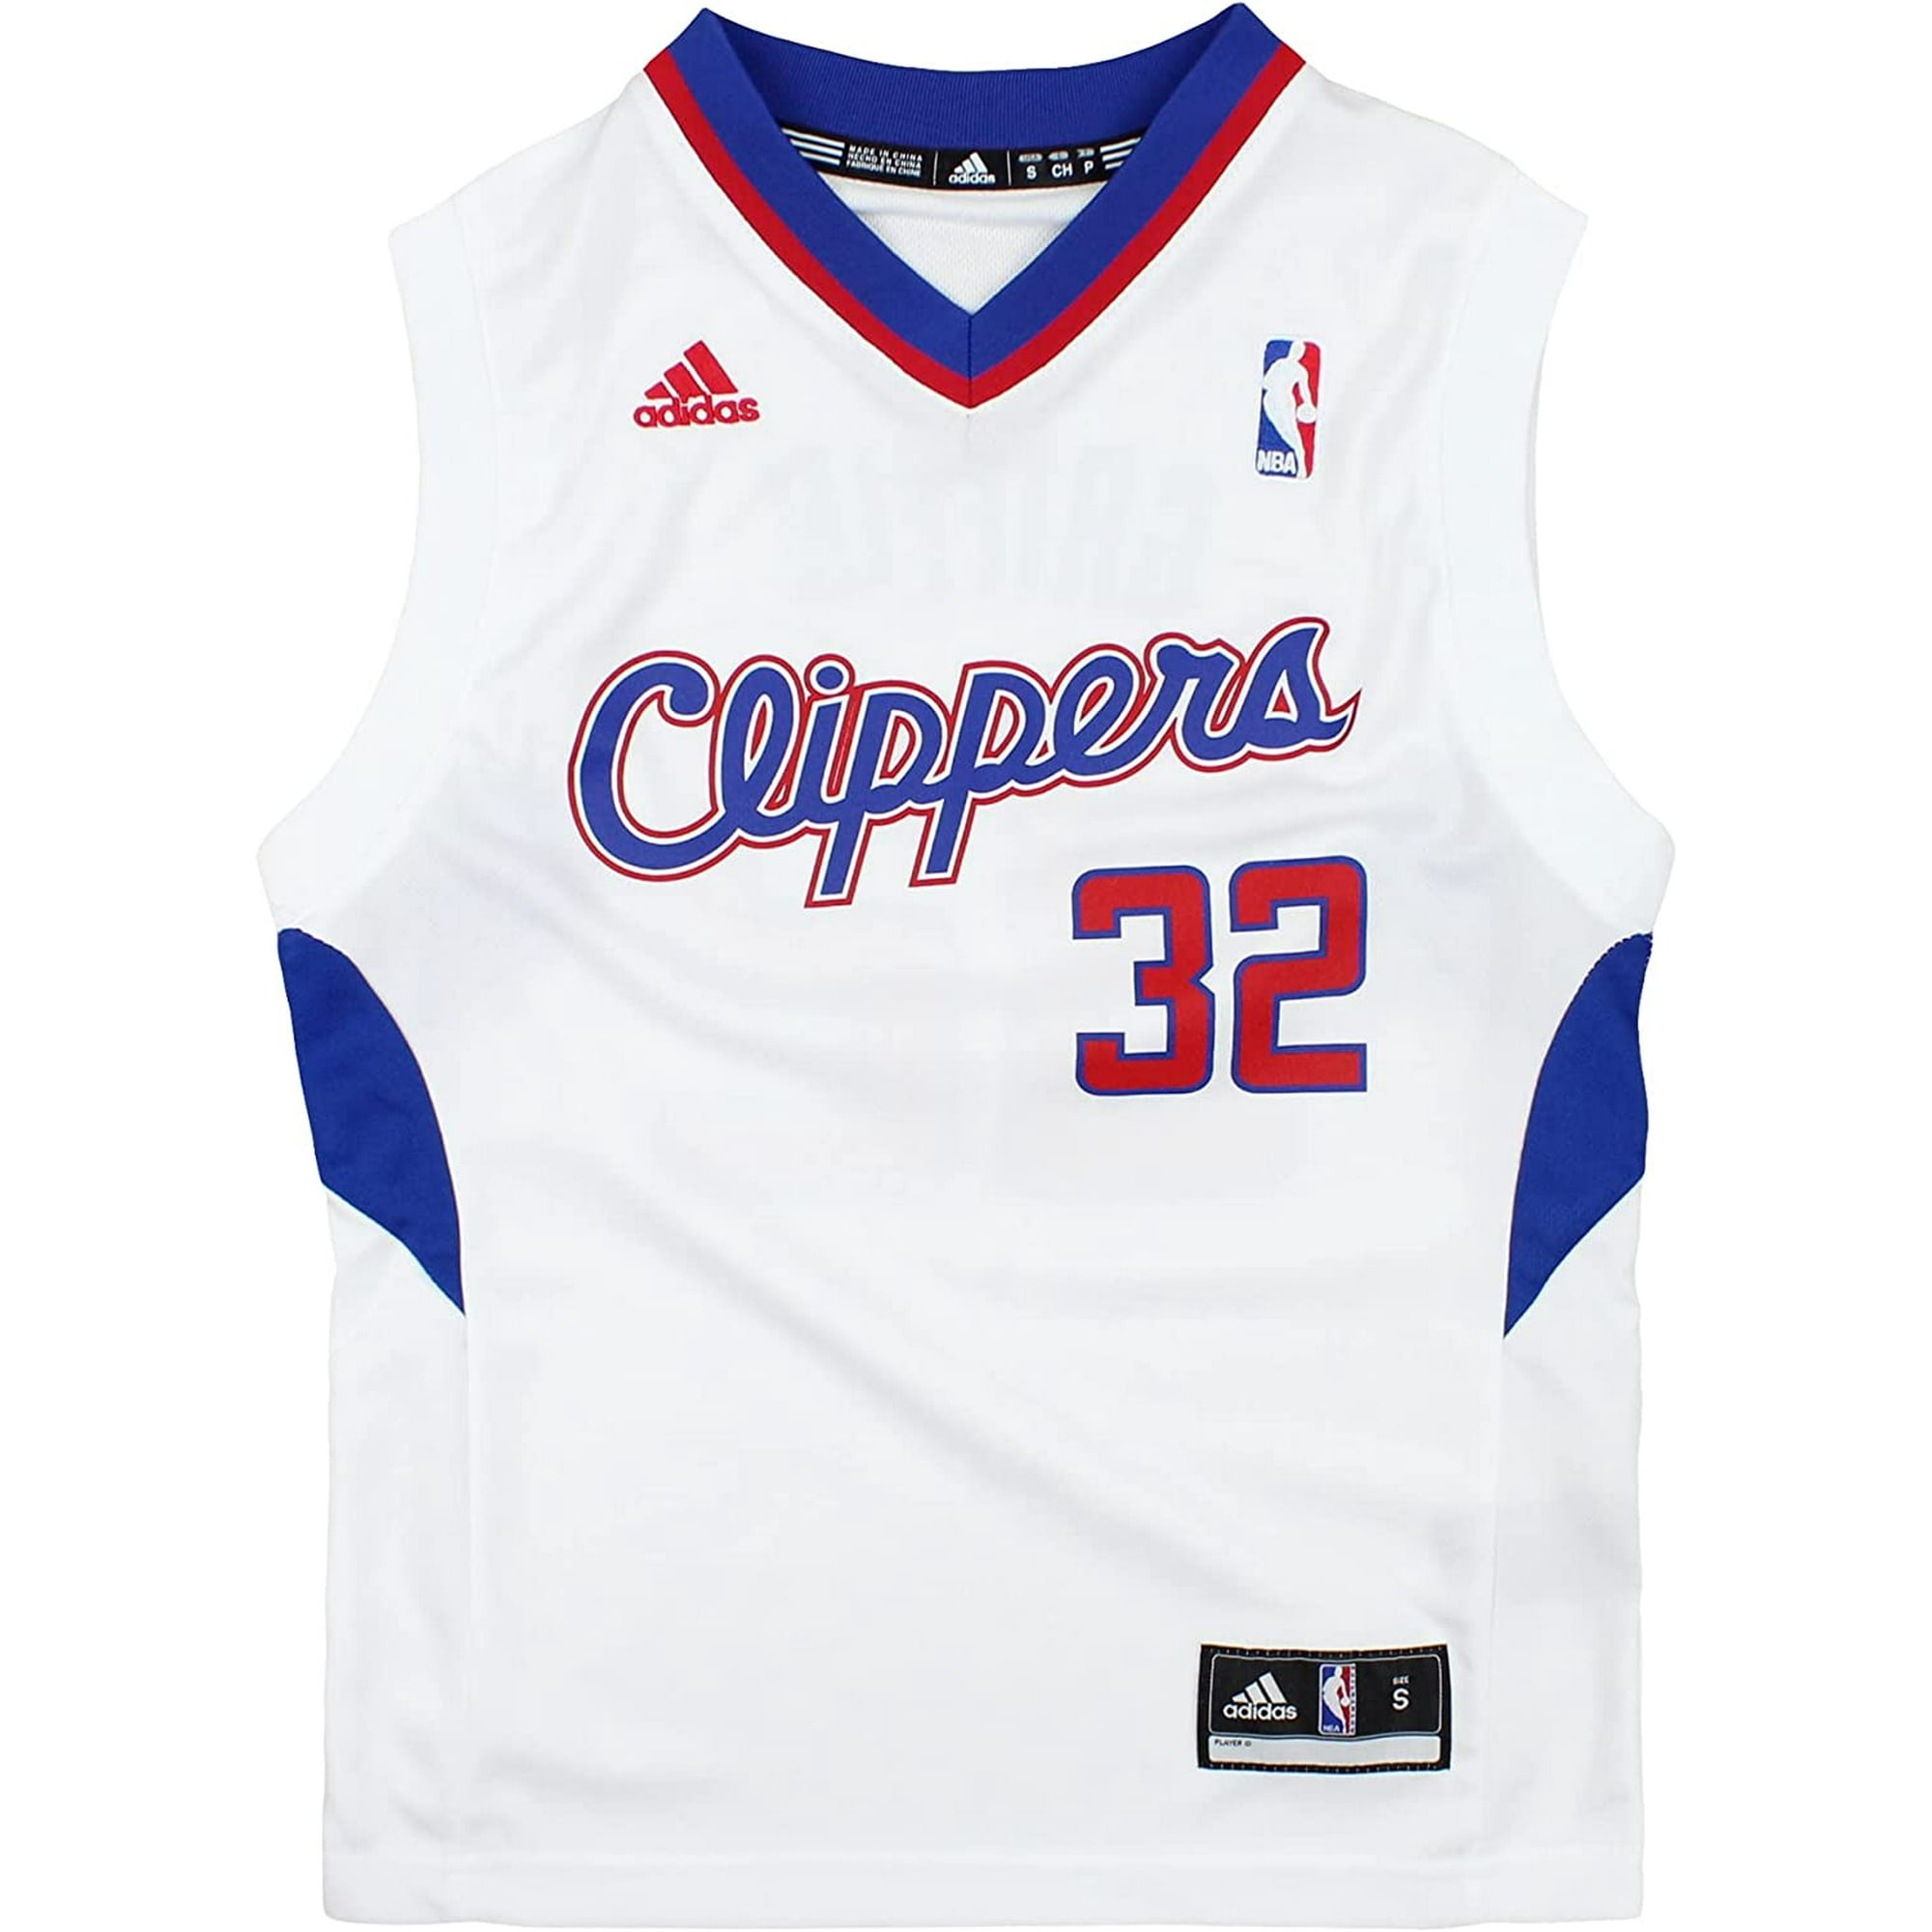 Adidas Los Angeles Clippers Blake Griffin Red Jersey NBA Youth Kid